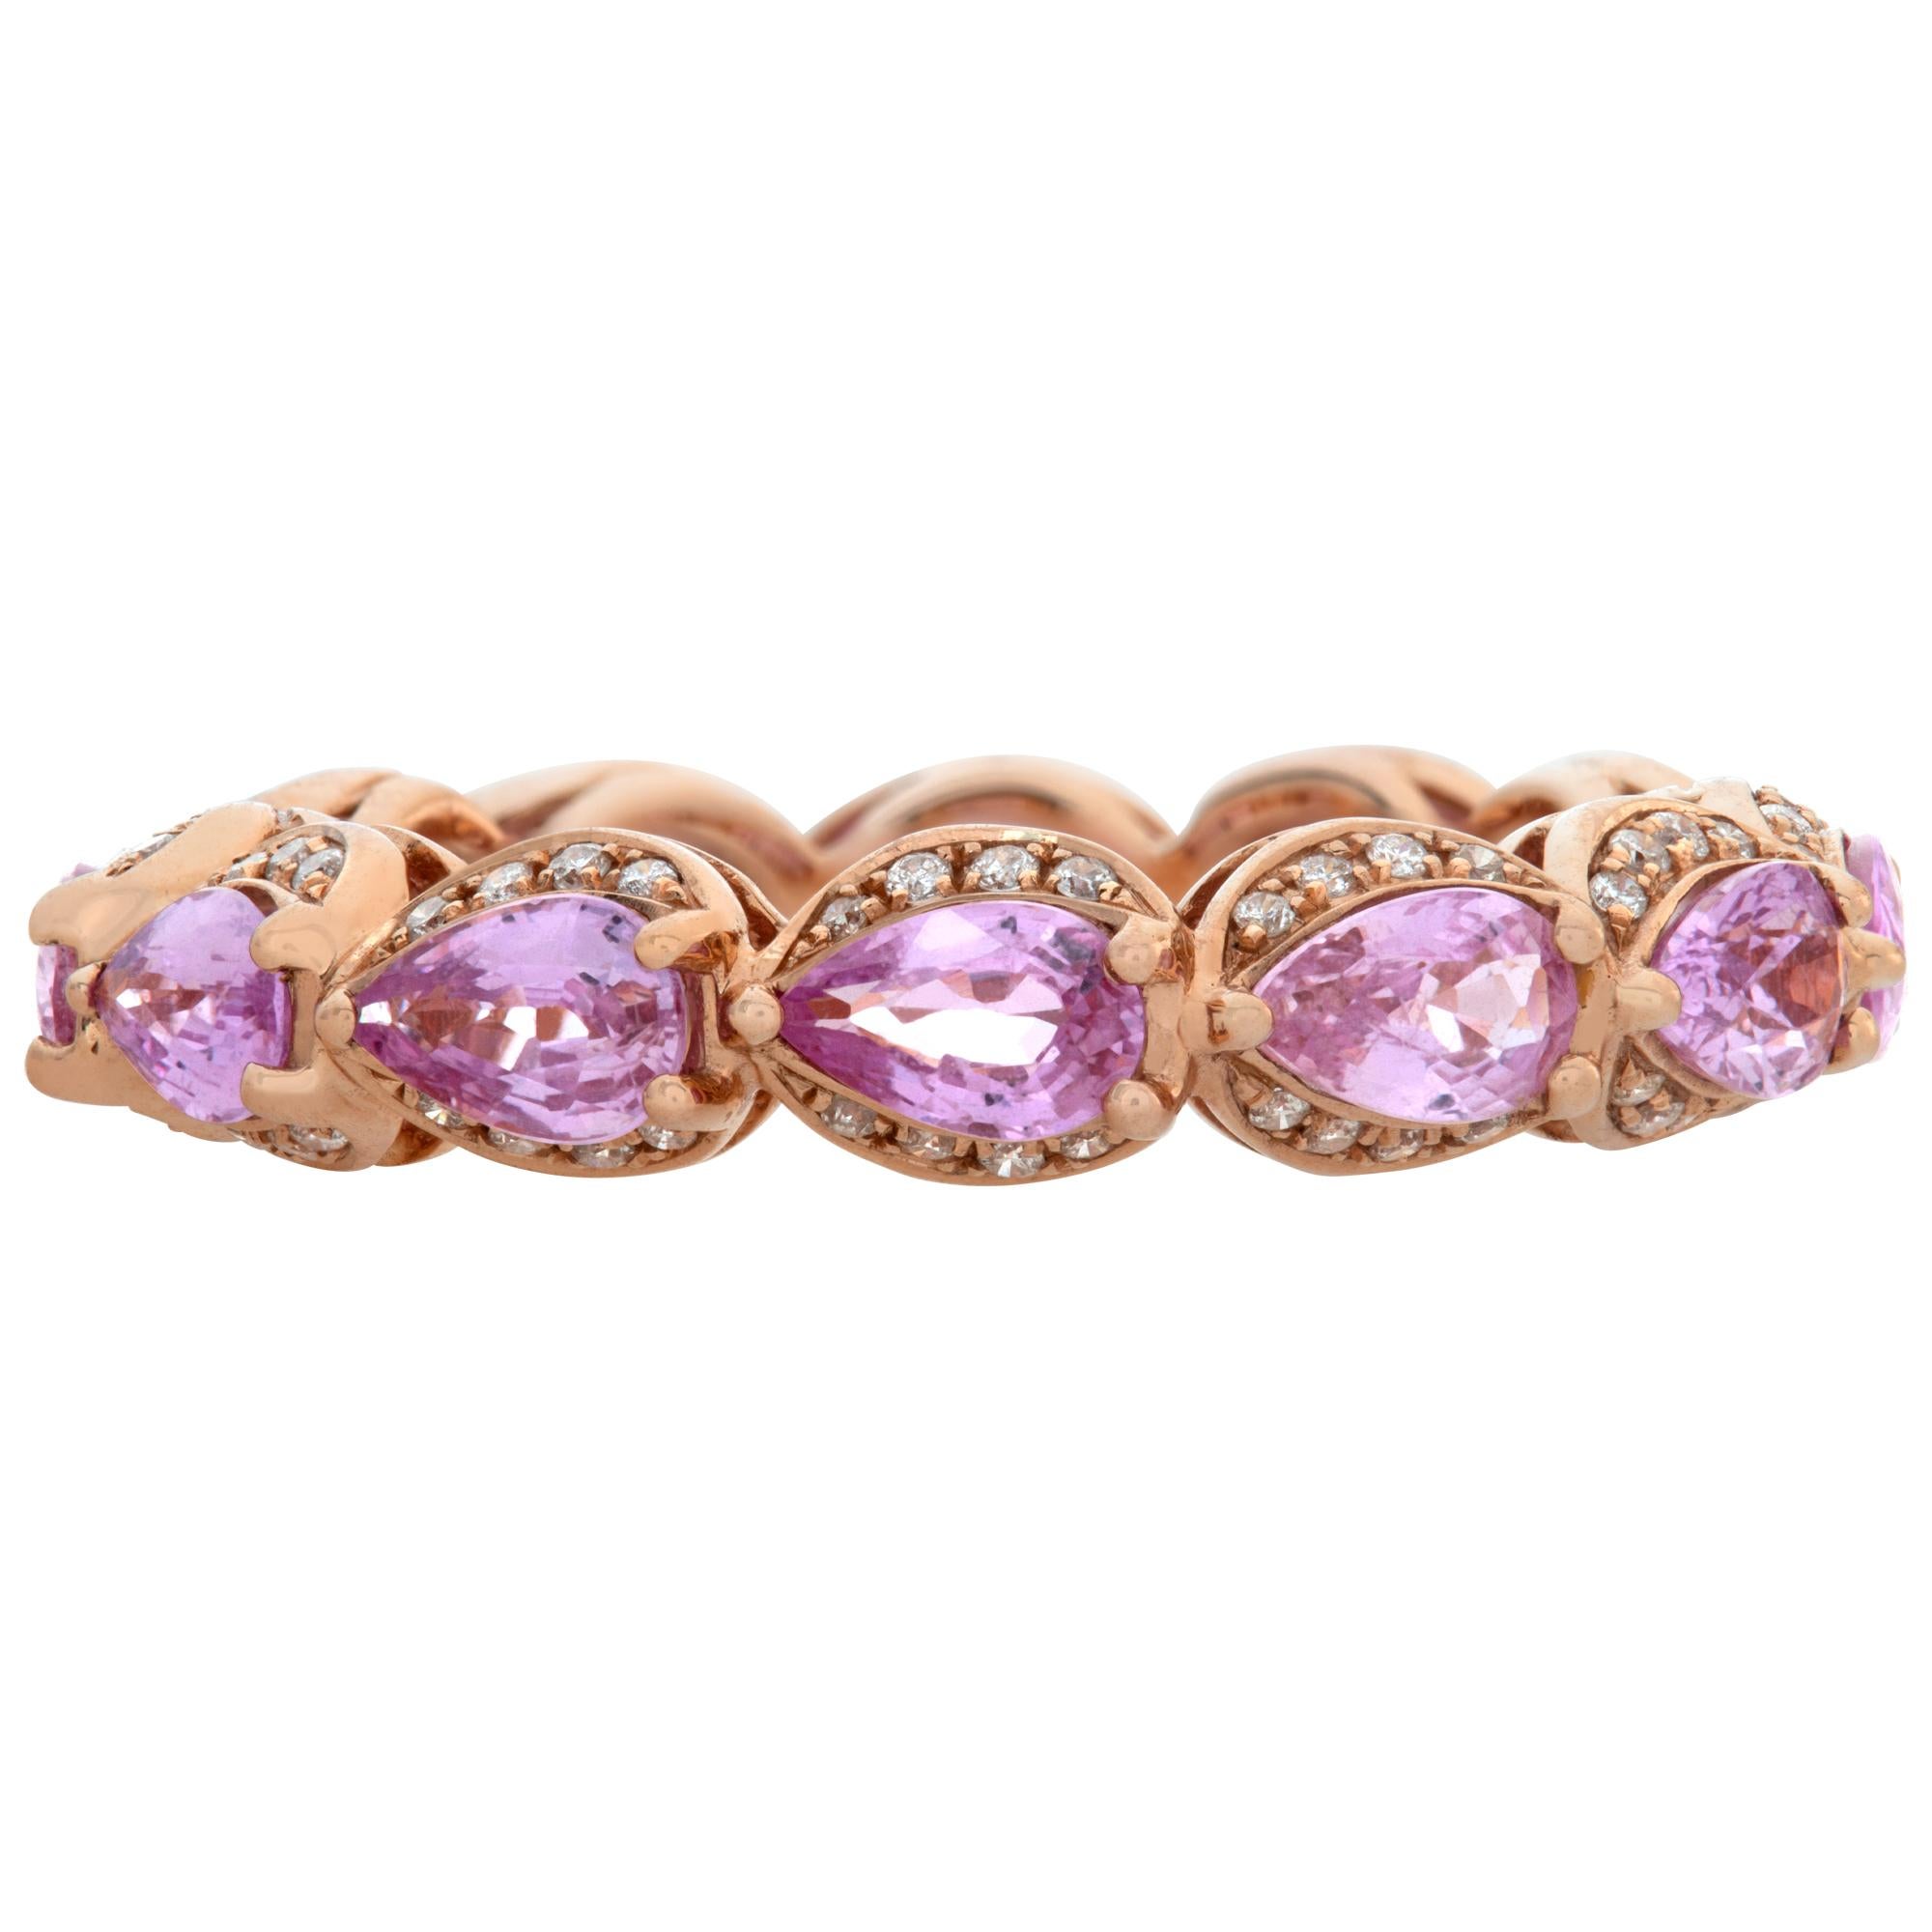 Pink sapphire and diamond eternity bands in 18k rose gold, with 0.29 carats in diamonds and 3.08 carats in pink sapphires pear shaped. Size 7, width 4.5.This Diamond/Sapphires ring is currently size 7 and some items can be sized up or down, please